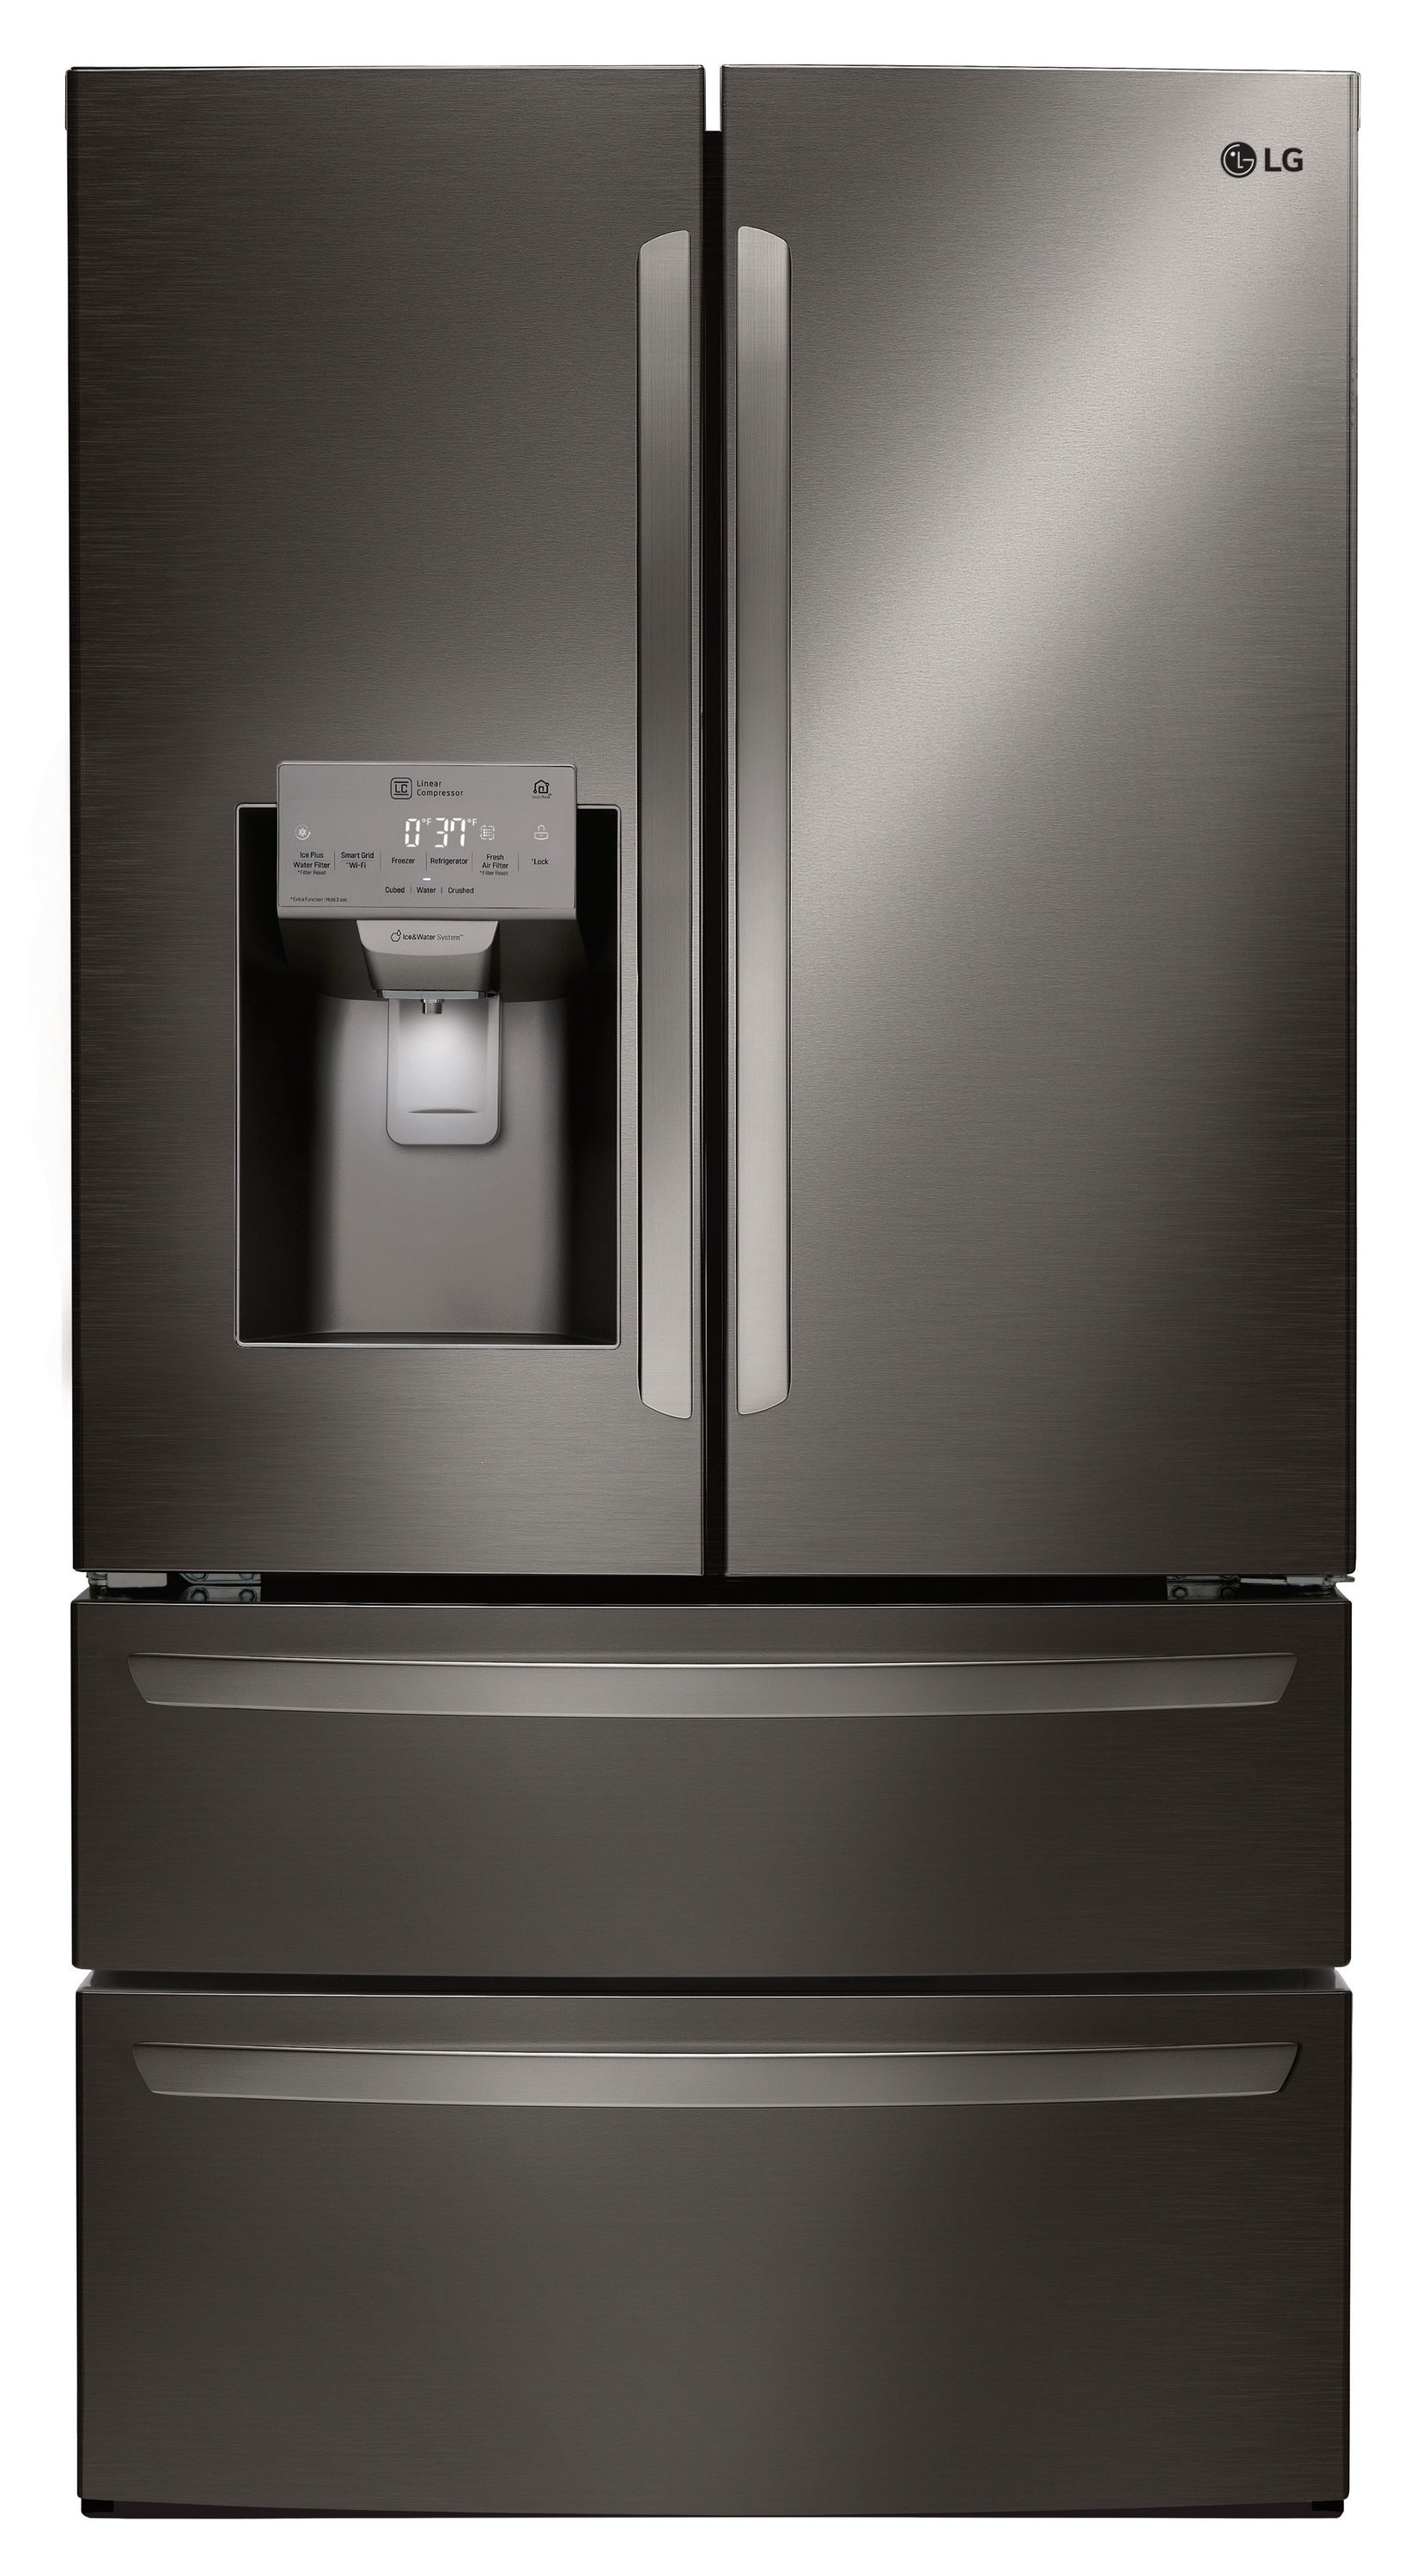 LG Smart Wi-Fi Enabled 27.8-cu ft French Door Refrigerator with Ice Maker (Printproof Black Stainless Steel) STAR in the French Door Refrigerators department at Lowes.com